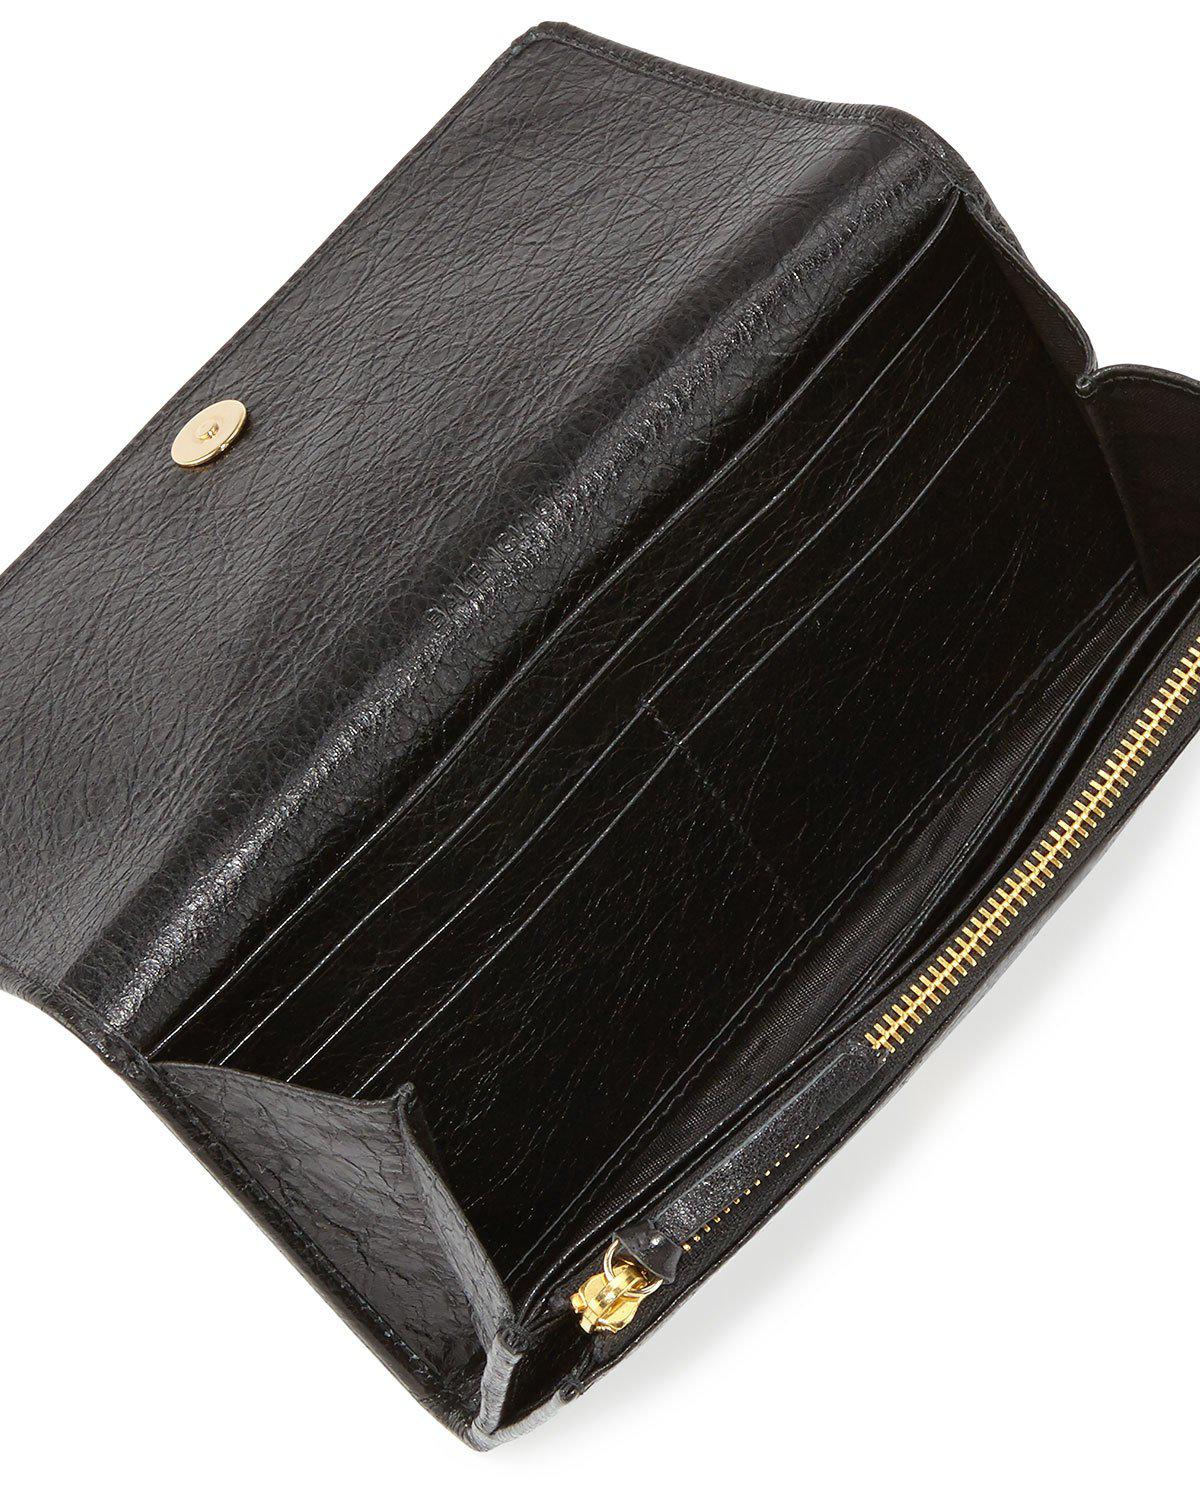 Balenciaga Leather Classic Gold Money Wallet in Black - Lyst